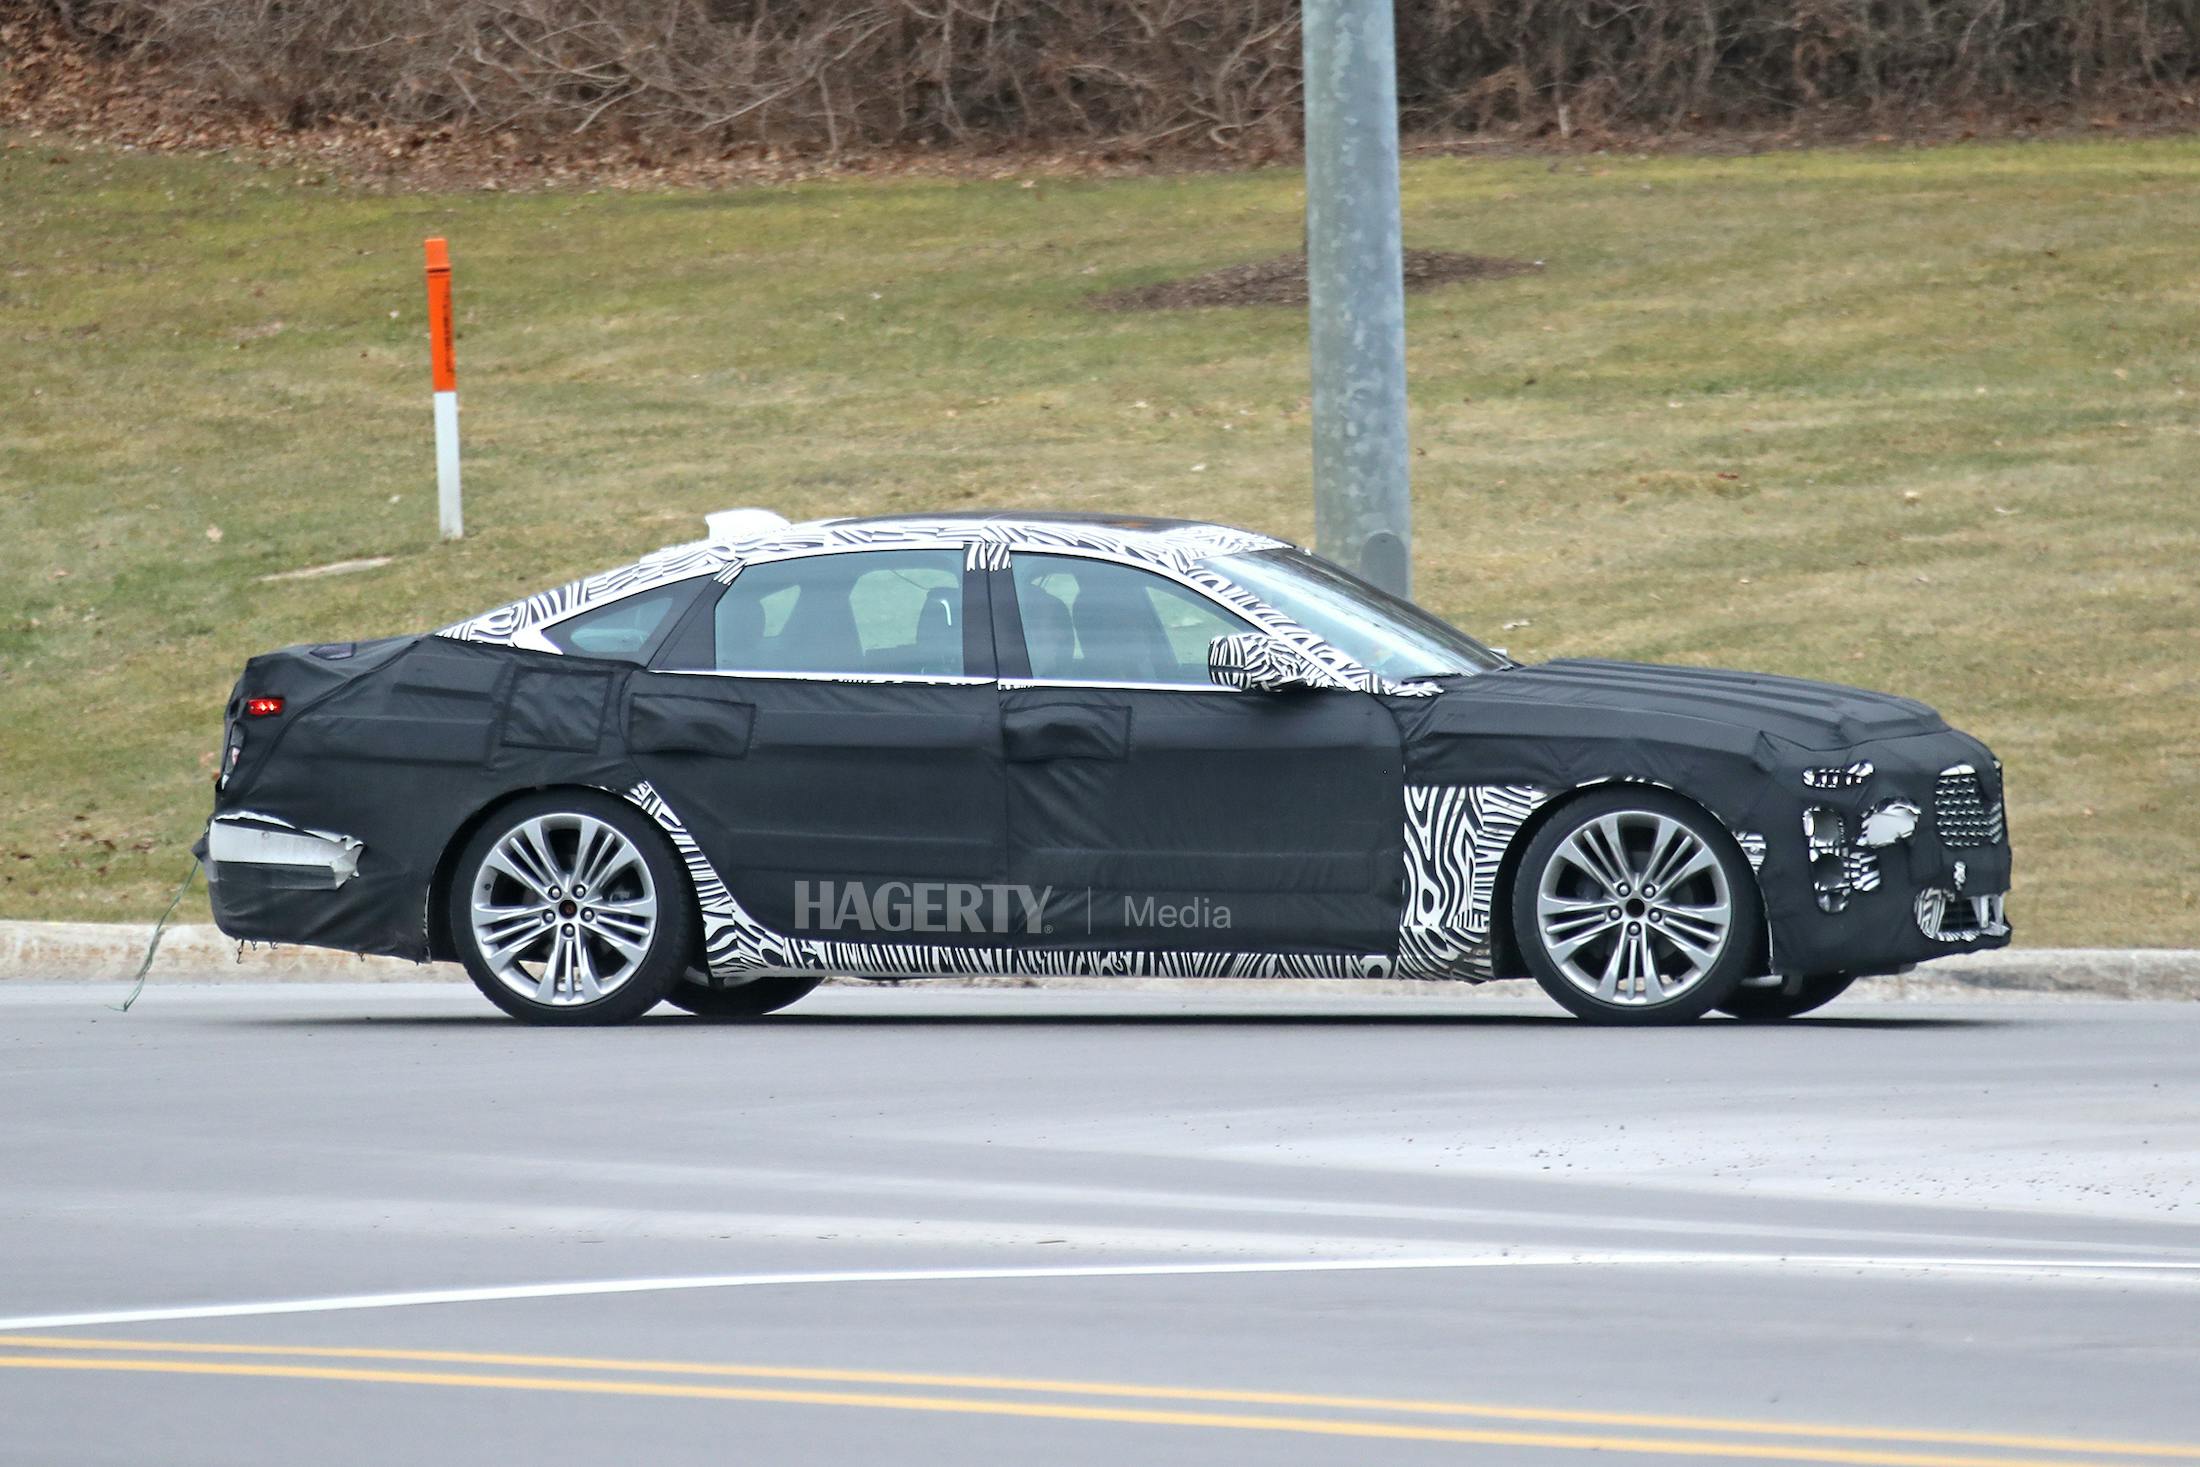 New Cadillac CT6 spied side view